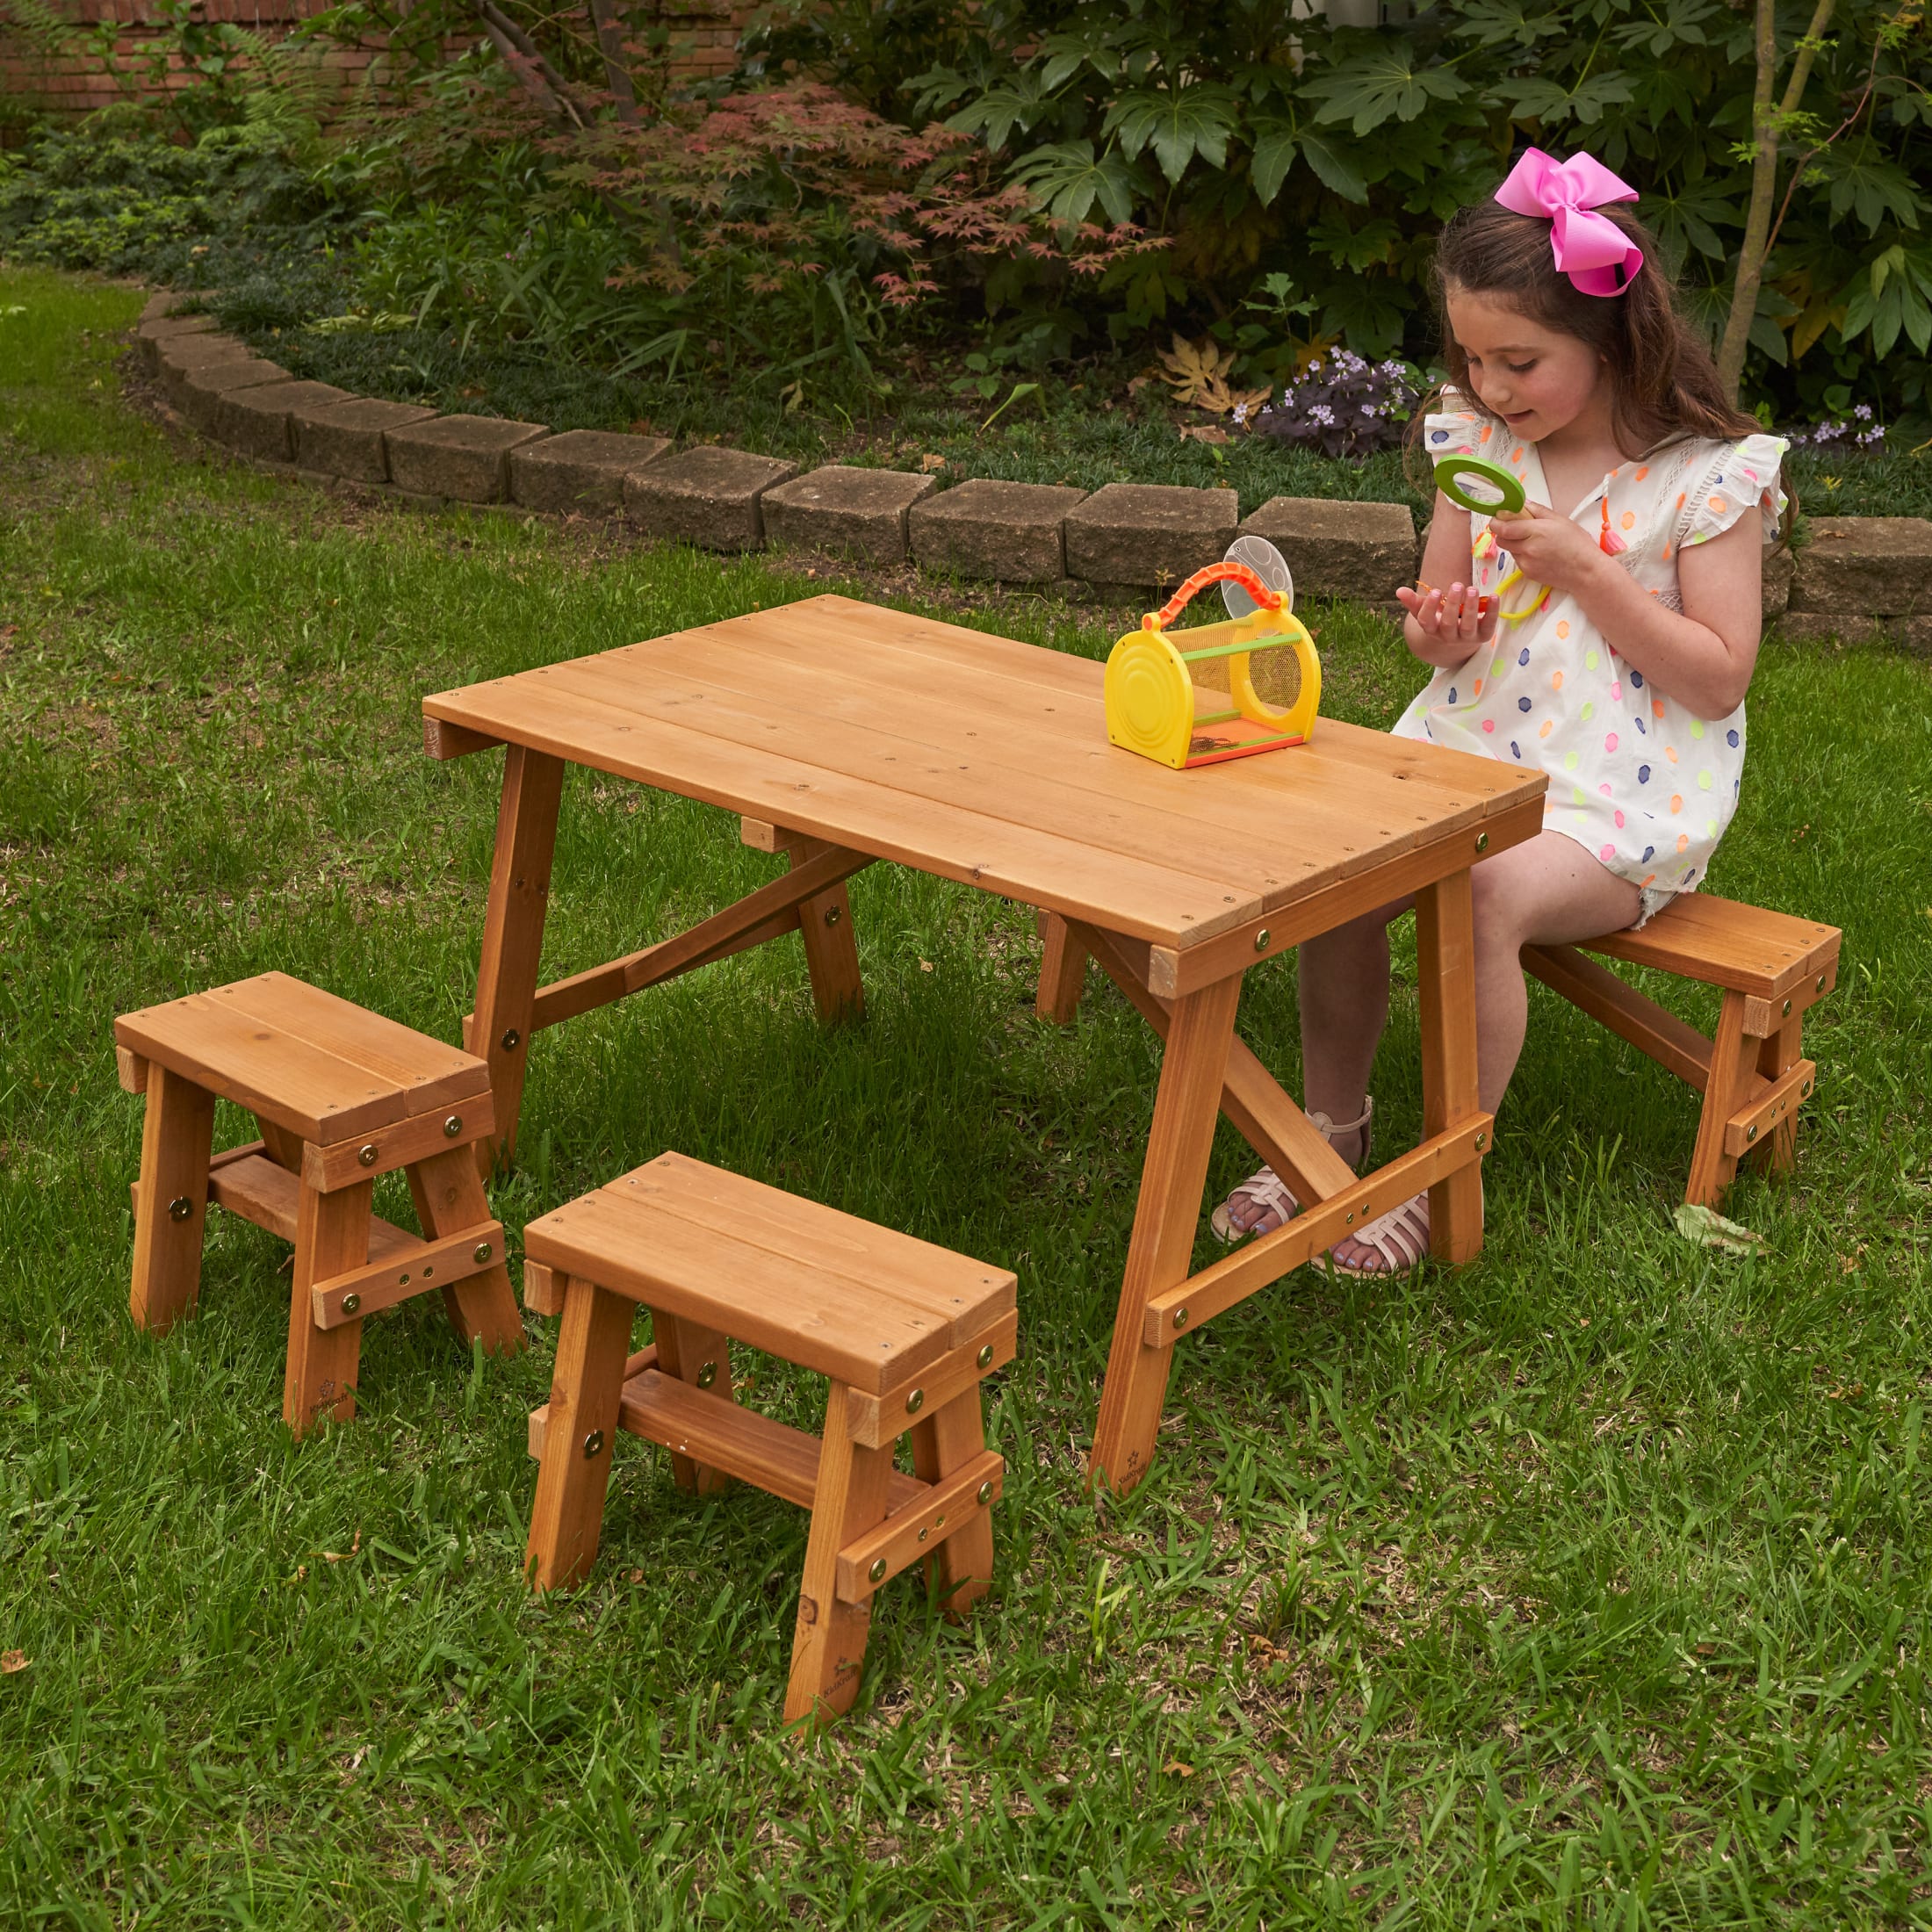 KidKraft Wooden Outdoor Picnic Table with Three Benches, Kids Patio Furniture, Amber - image 1 of 5